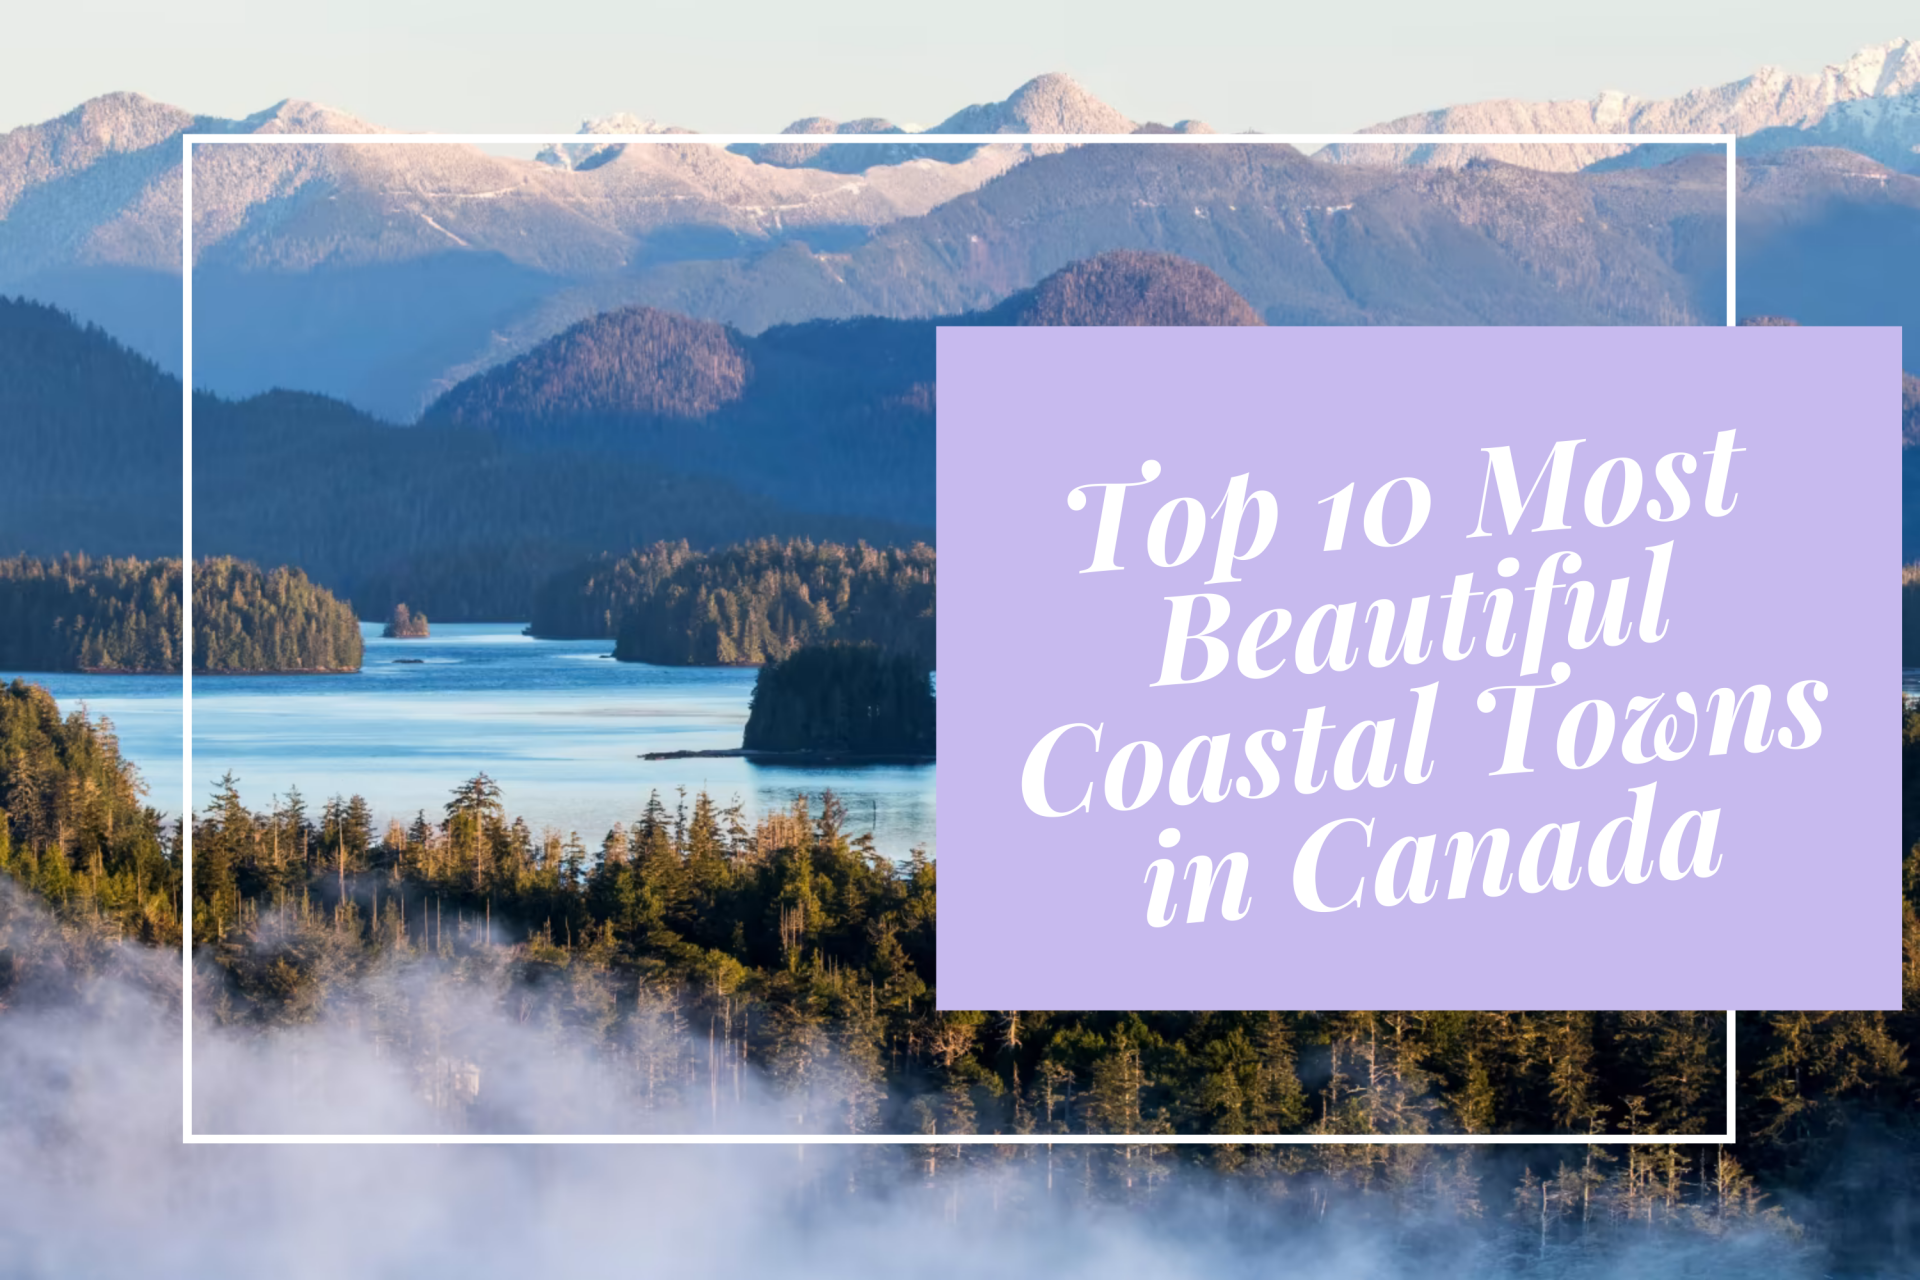 Top 10 Most Beautiful Coastal Towns in Canada